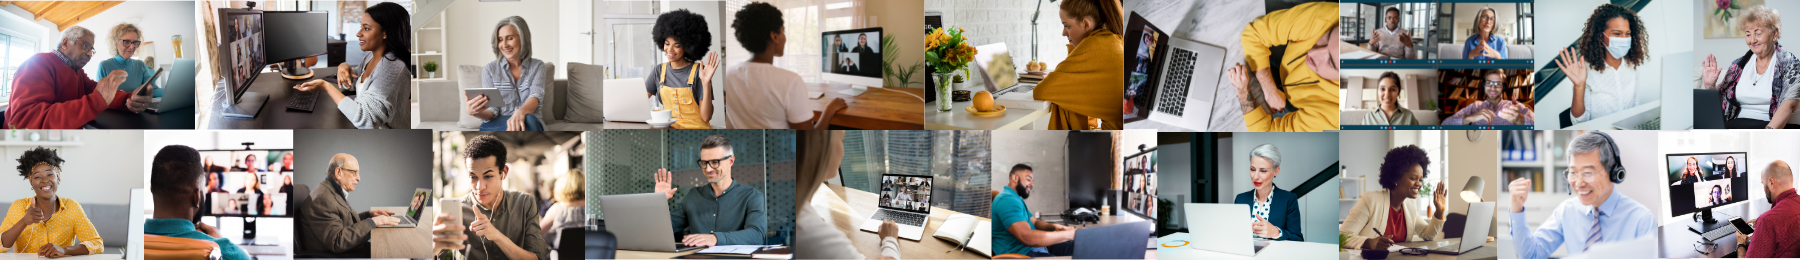 Composite image of a diverse range of people participating in digital/online meetings